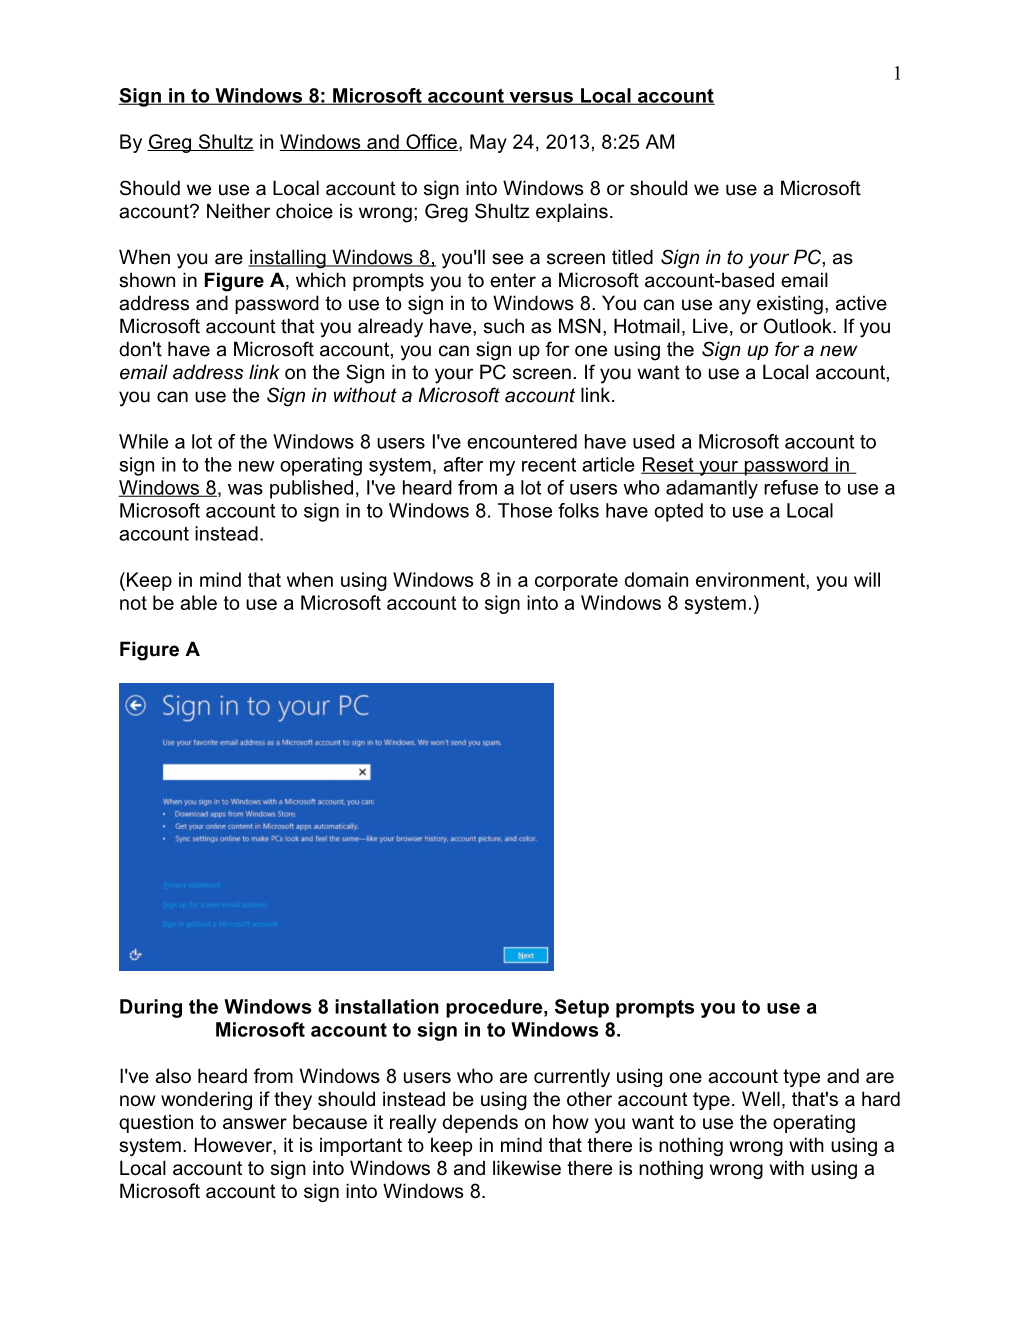 Sign in to Windows 8: Microsoft Account Versus Local Account